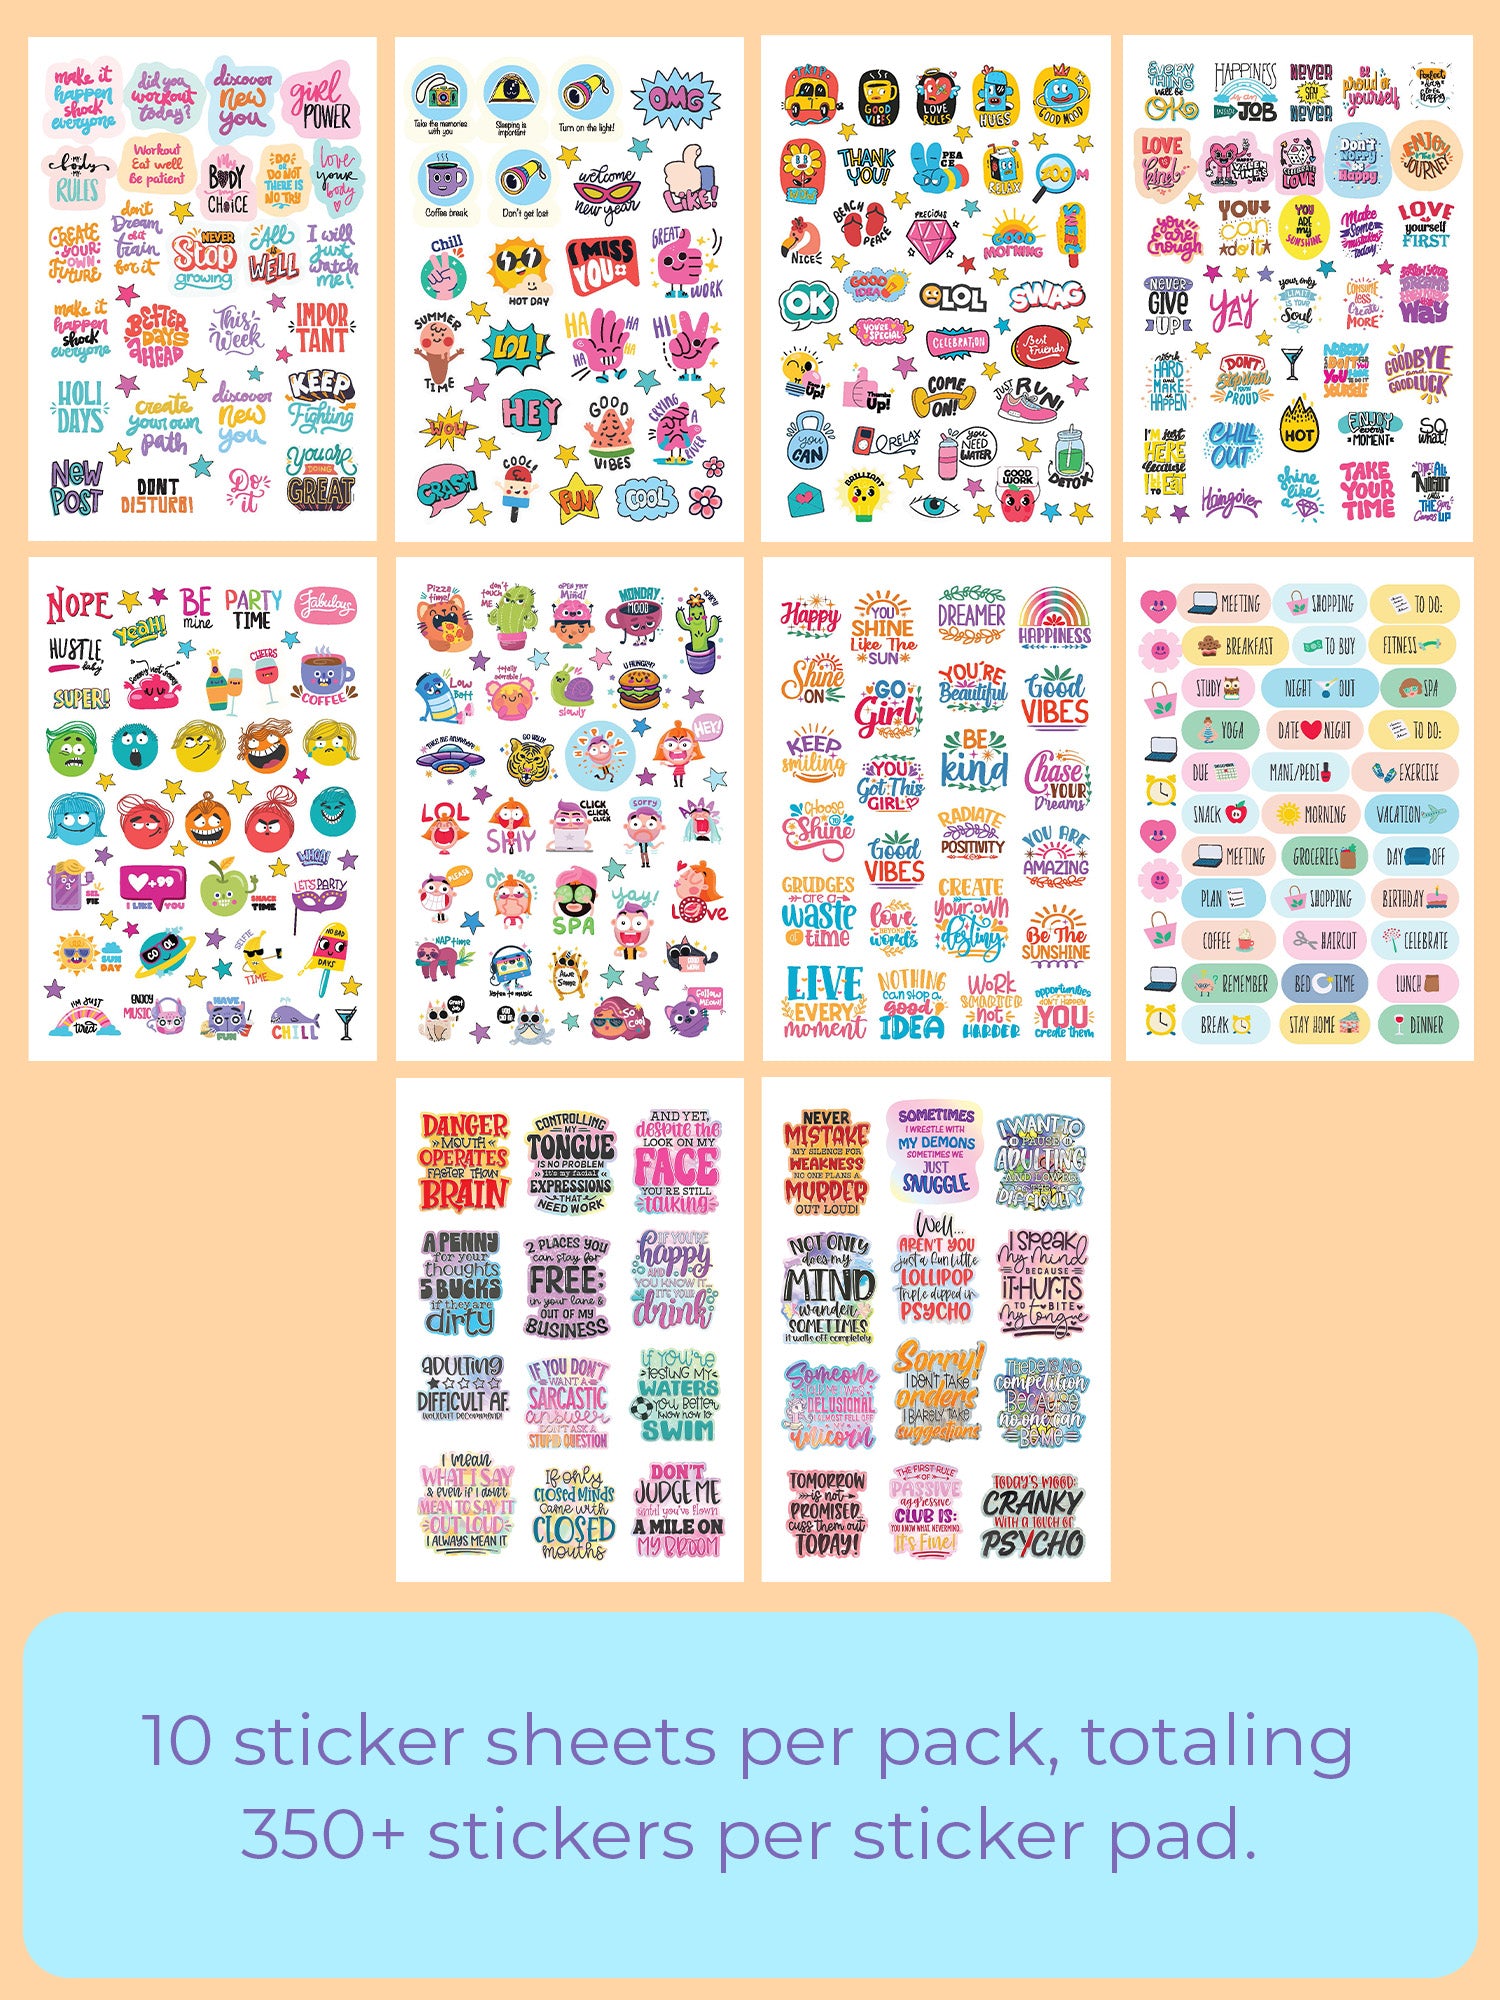 Add Colorful Fun to Your Life with 350+ Adhesive Stickers (Quirky Stickers)